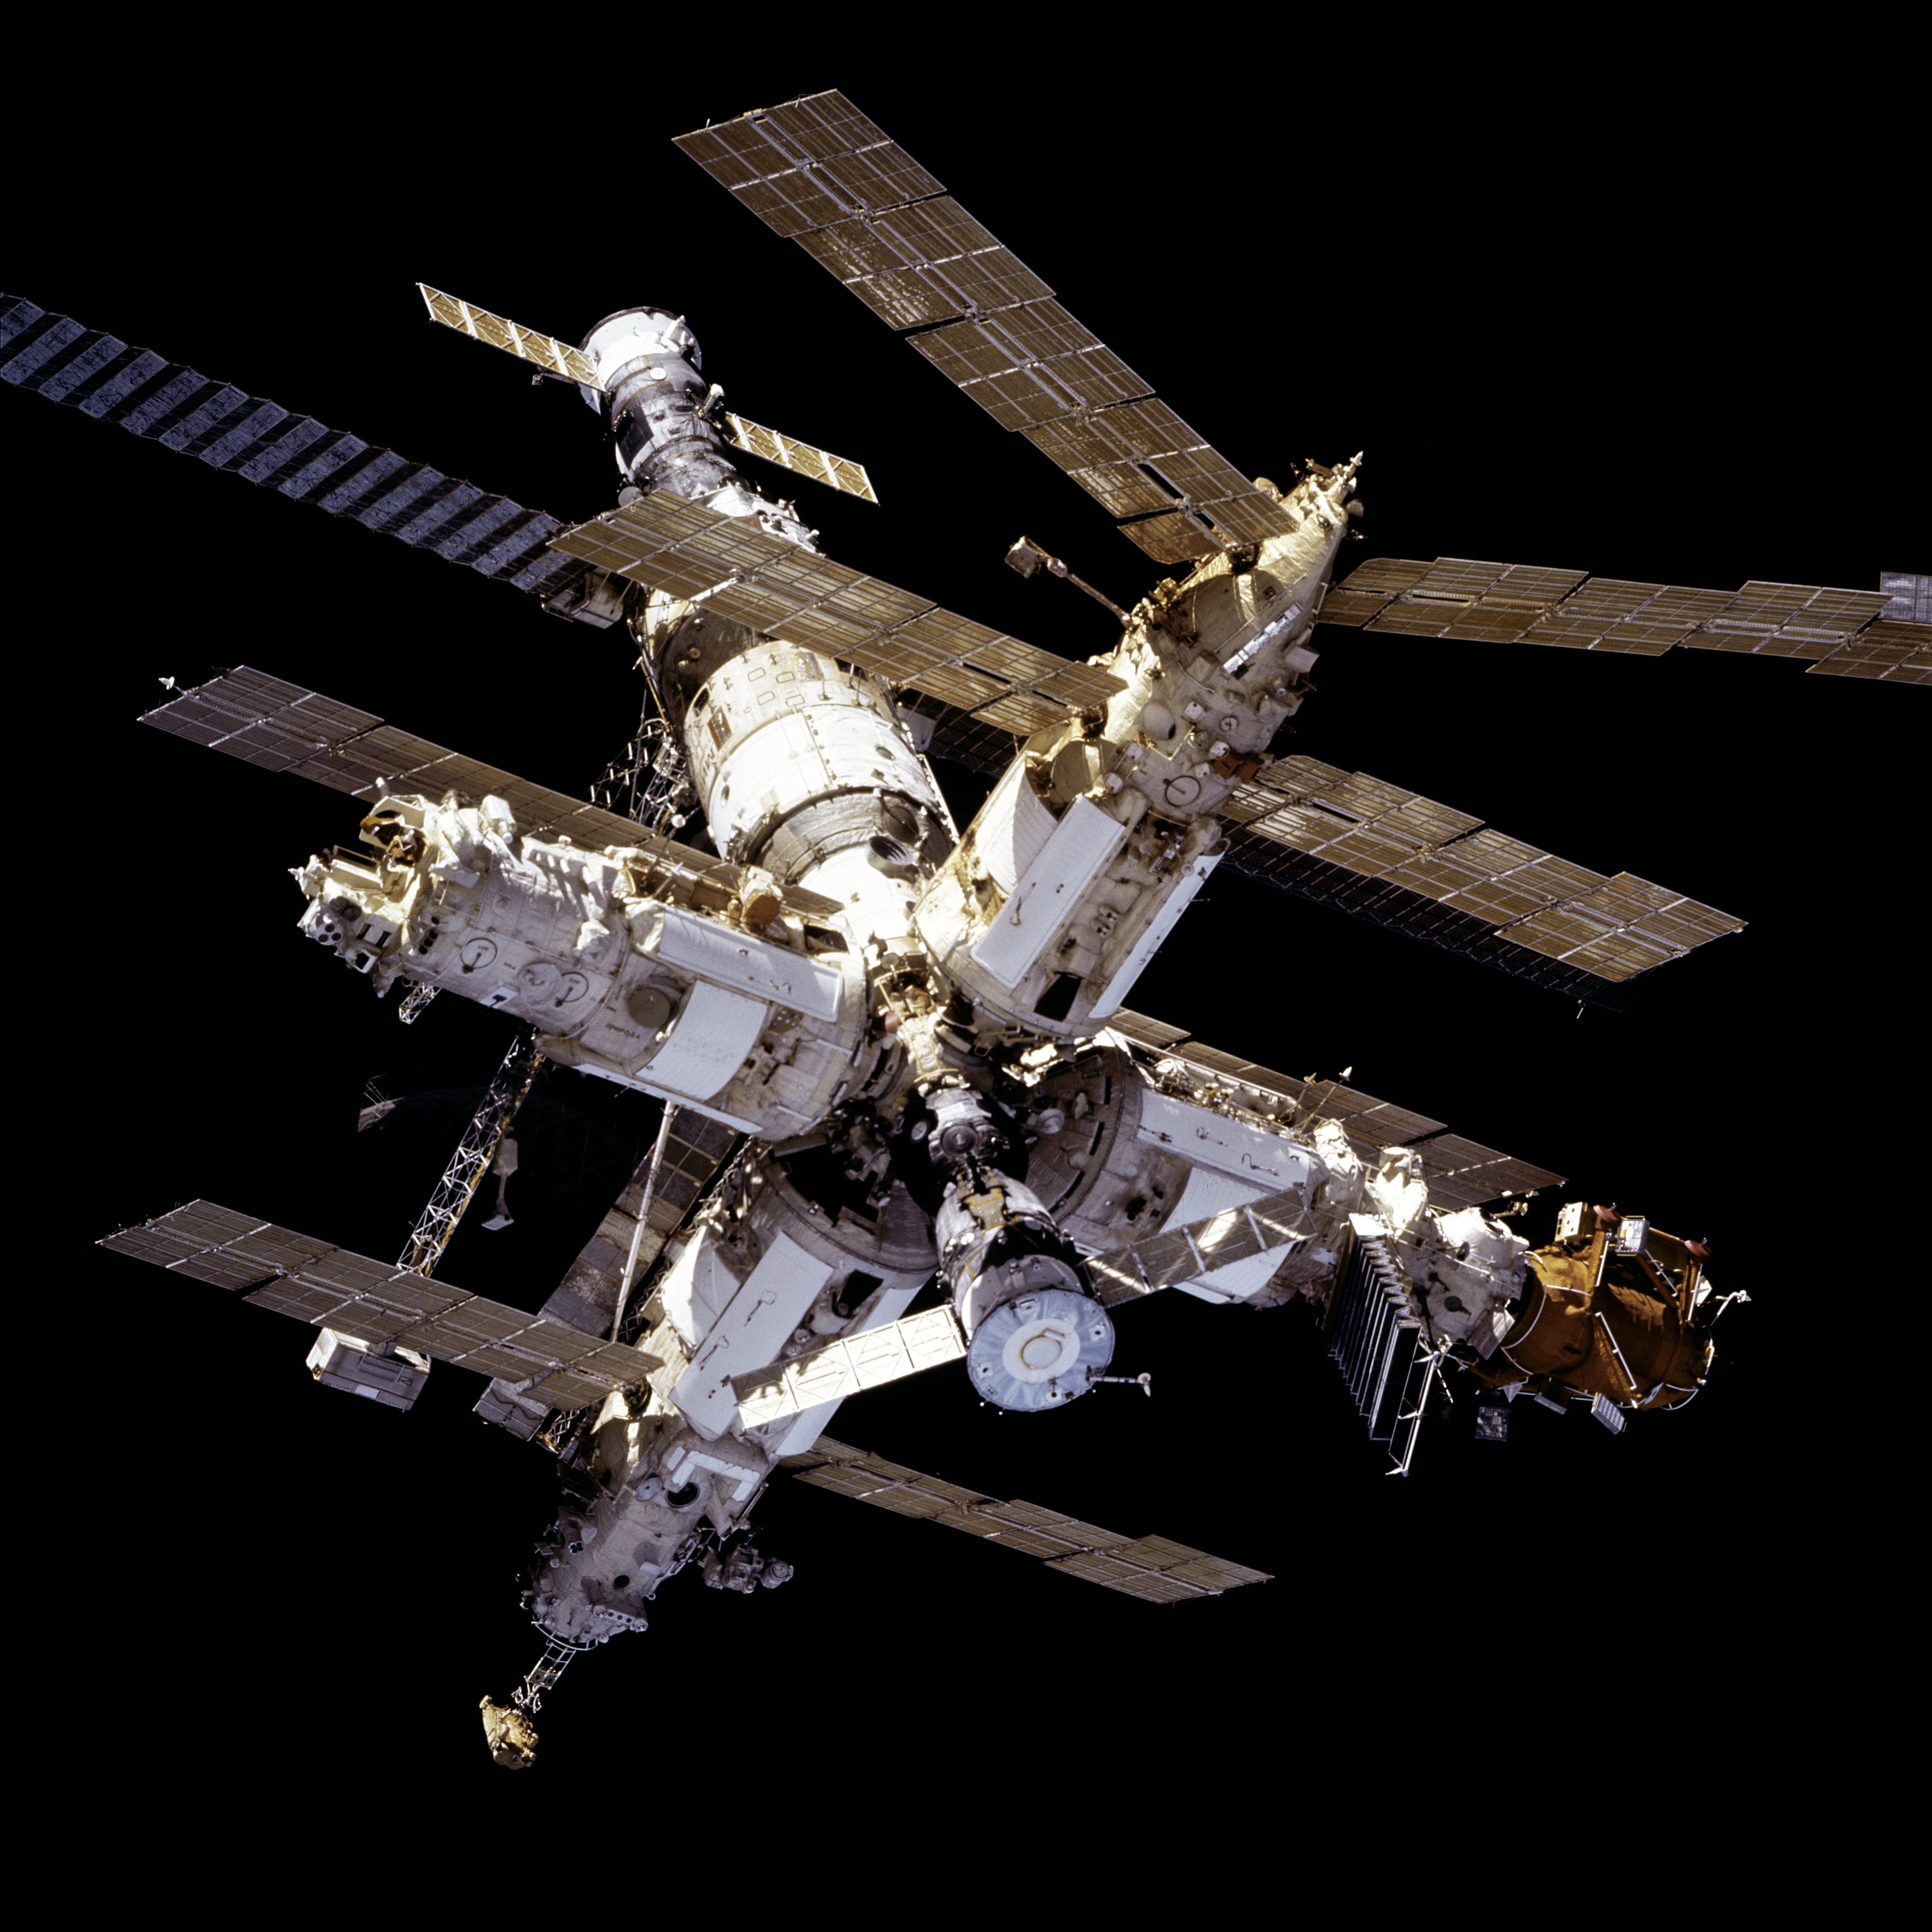 Mir_from_STS-81.jpg